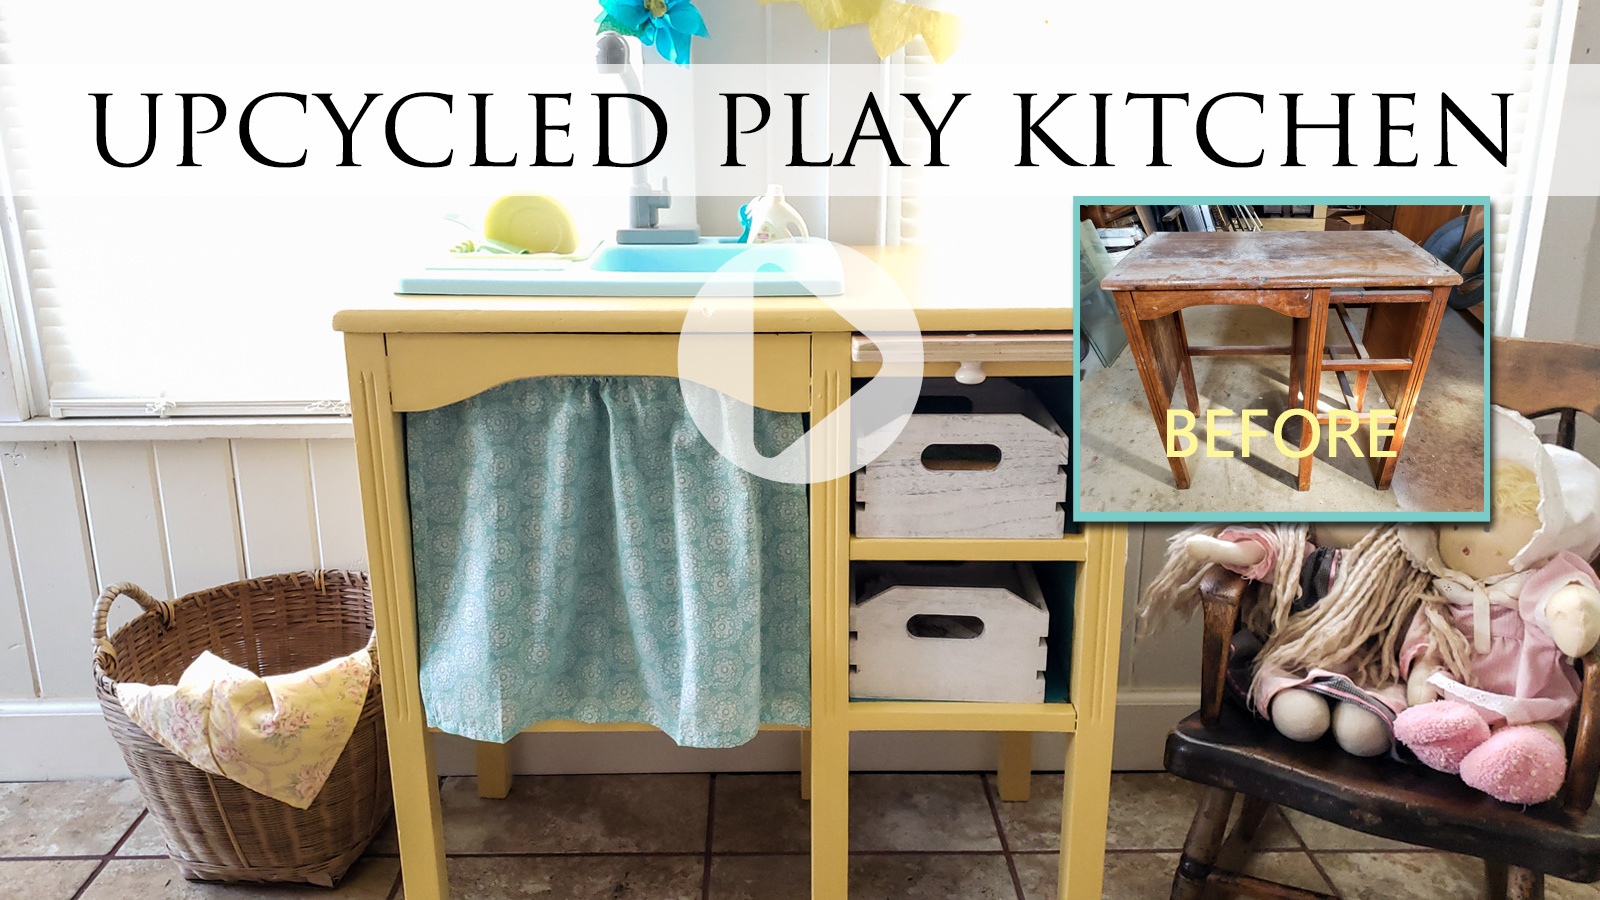 Video Tutorial Upcycled Play Kitchen by Prodigal Pieces | prodigalpieces.com